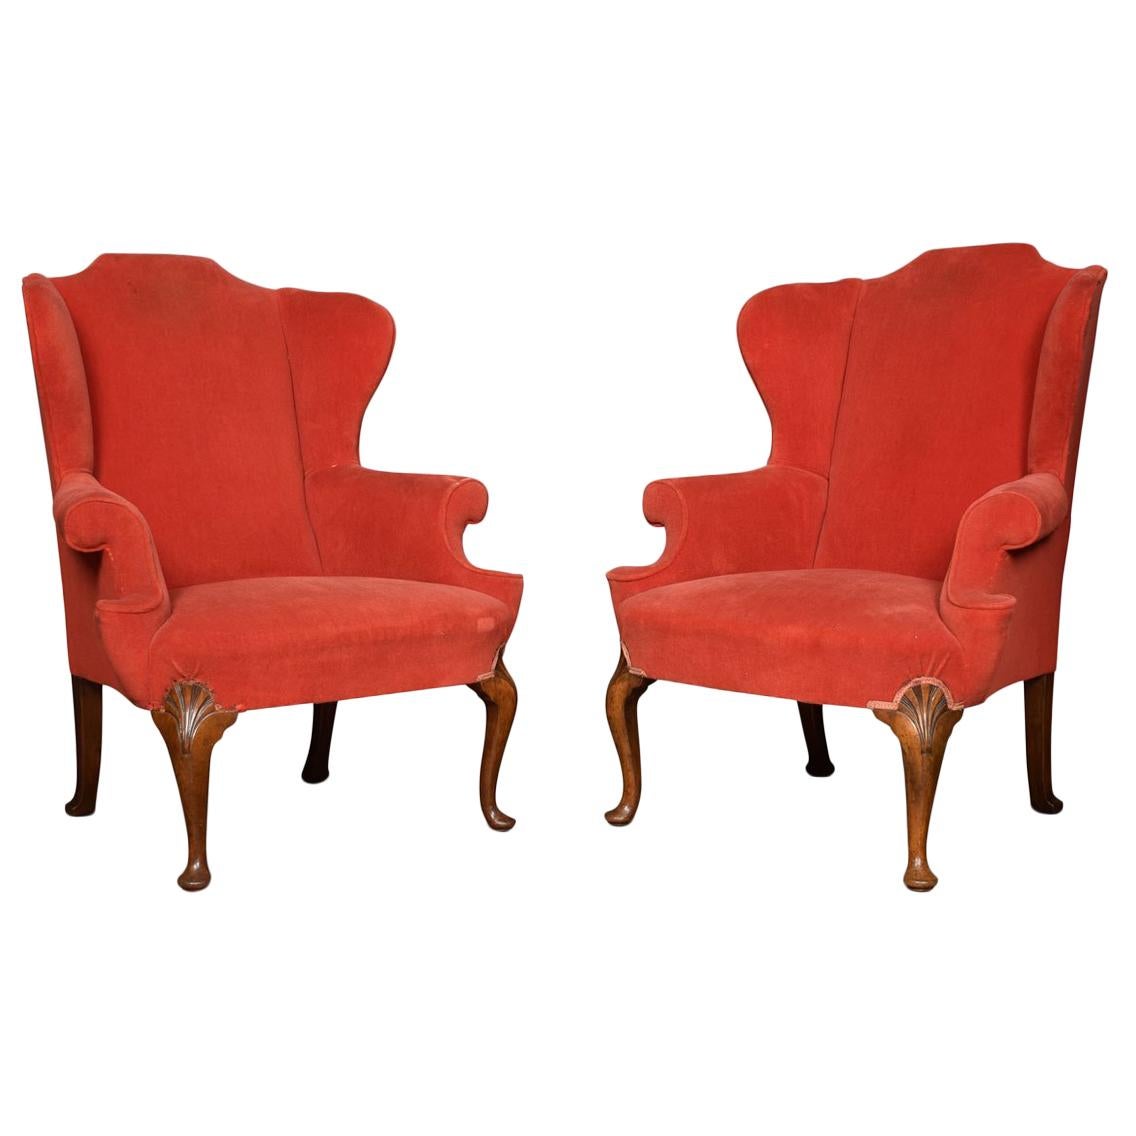 Pair of George I style wing armchairs